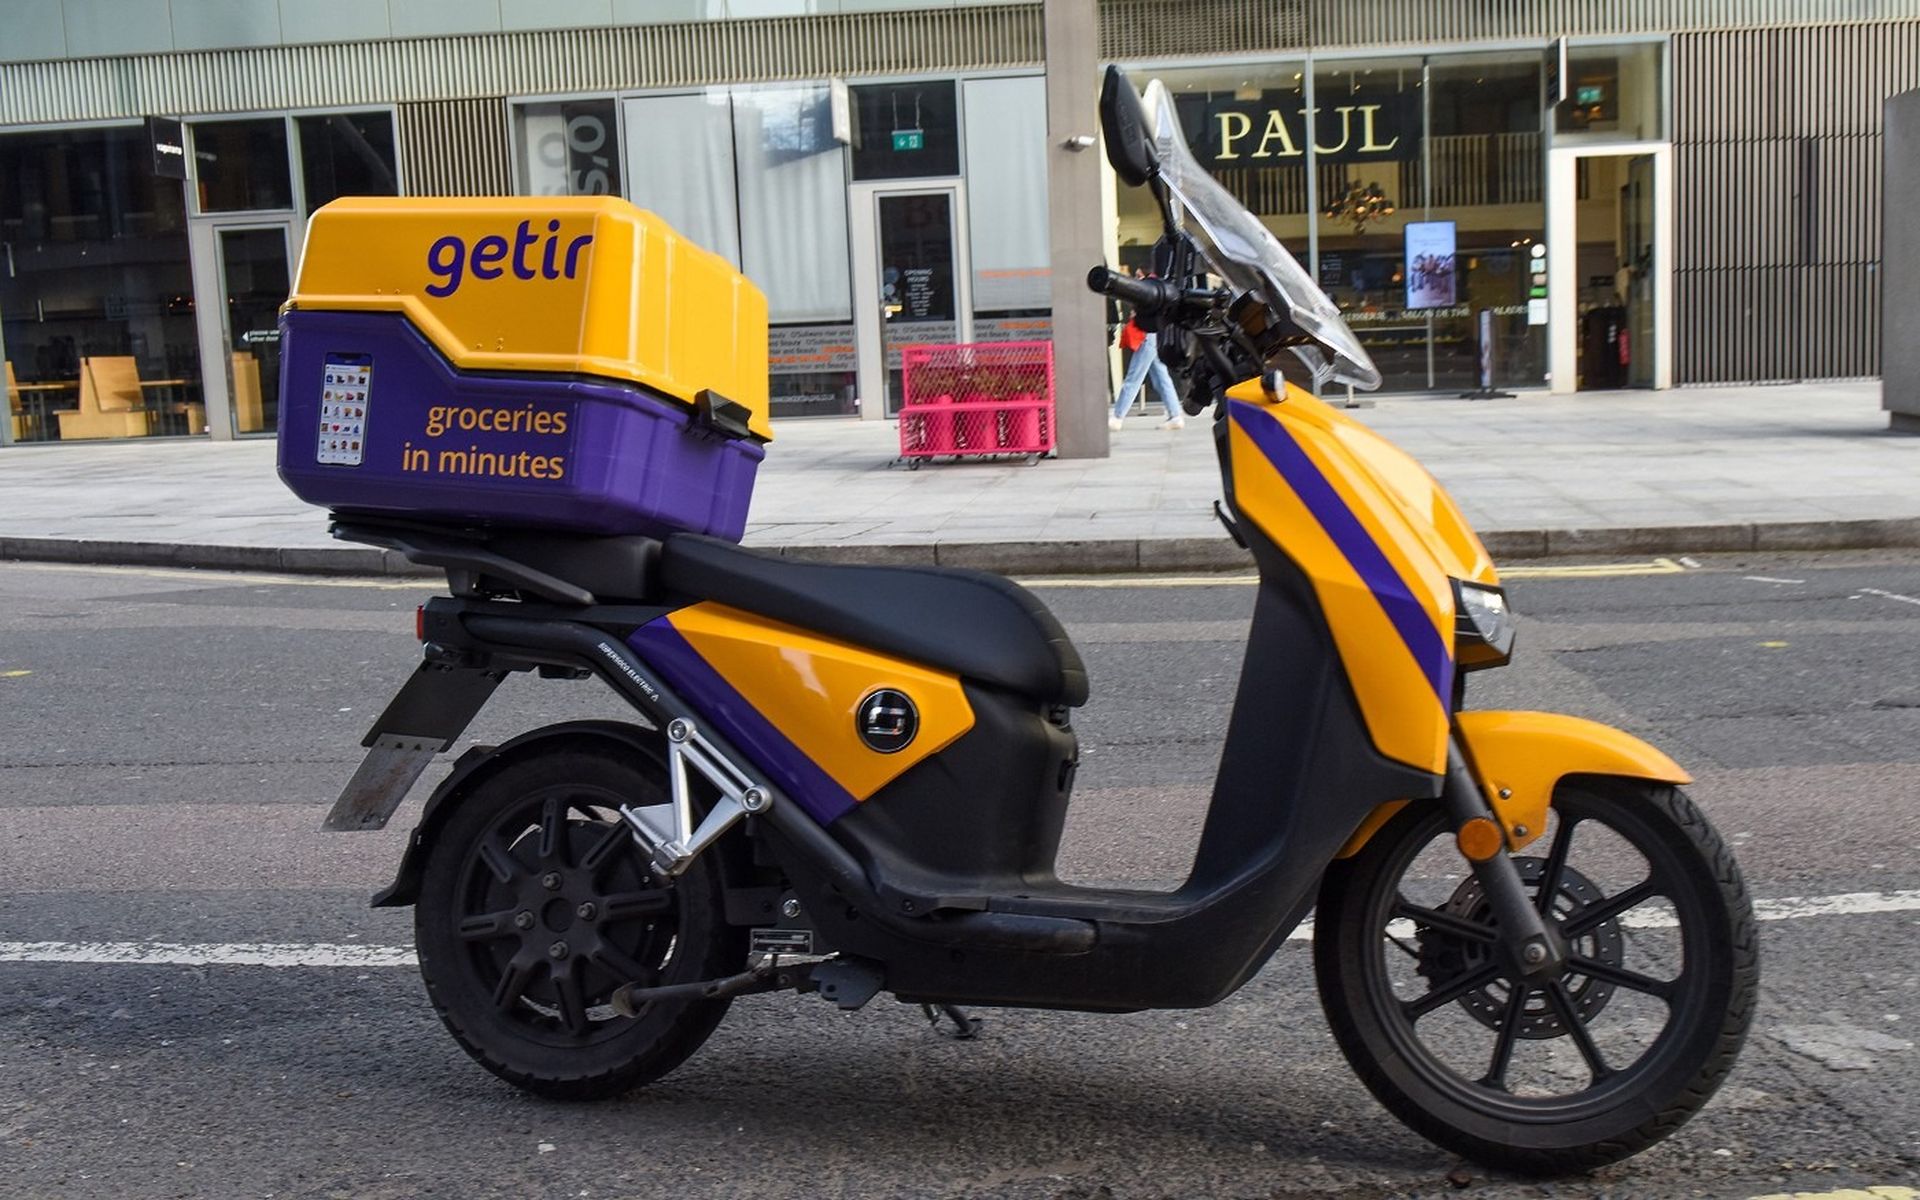 Turkish instant delivery startup is downsizing, Getir layoffs will affect 4480 people around the globe.